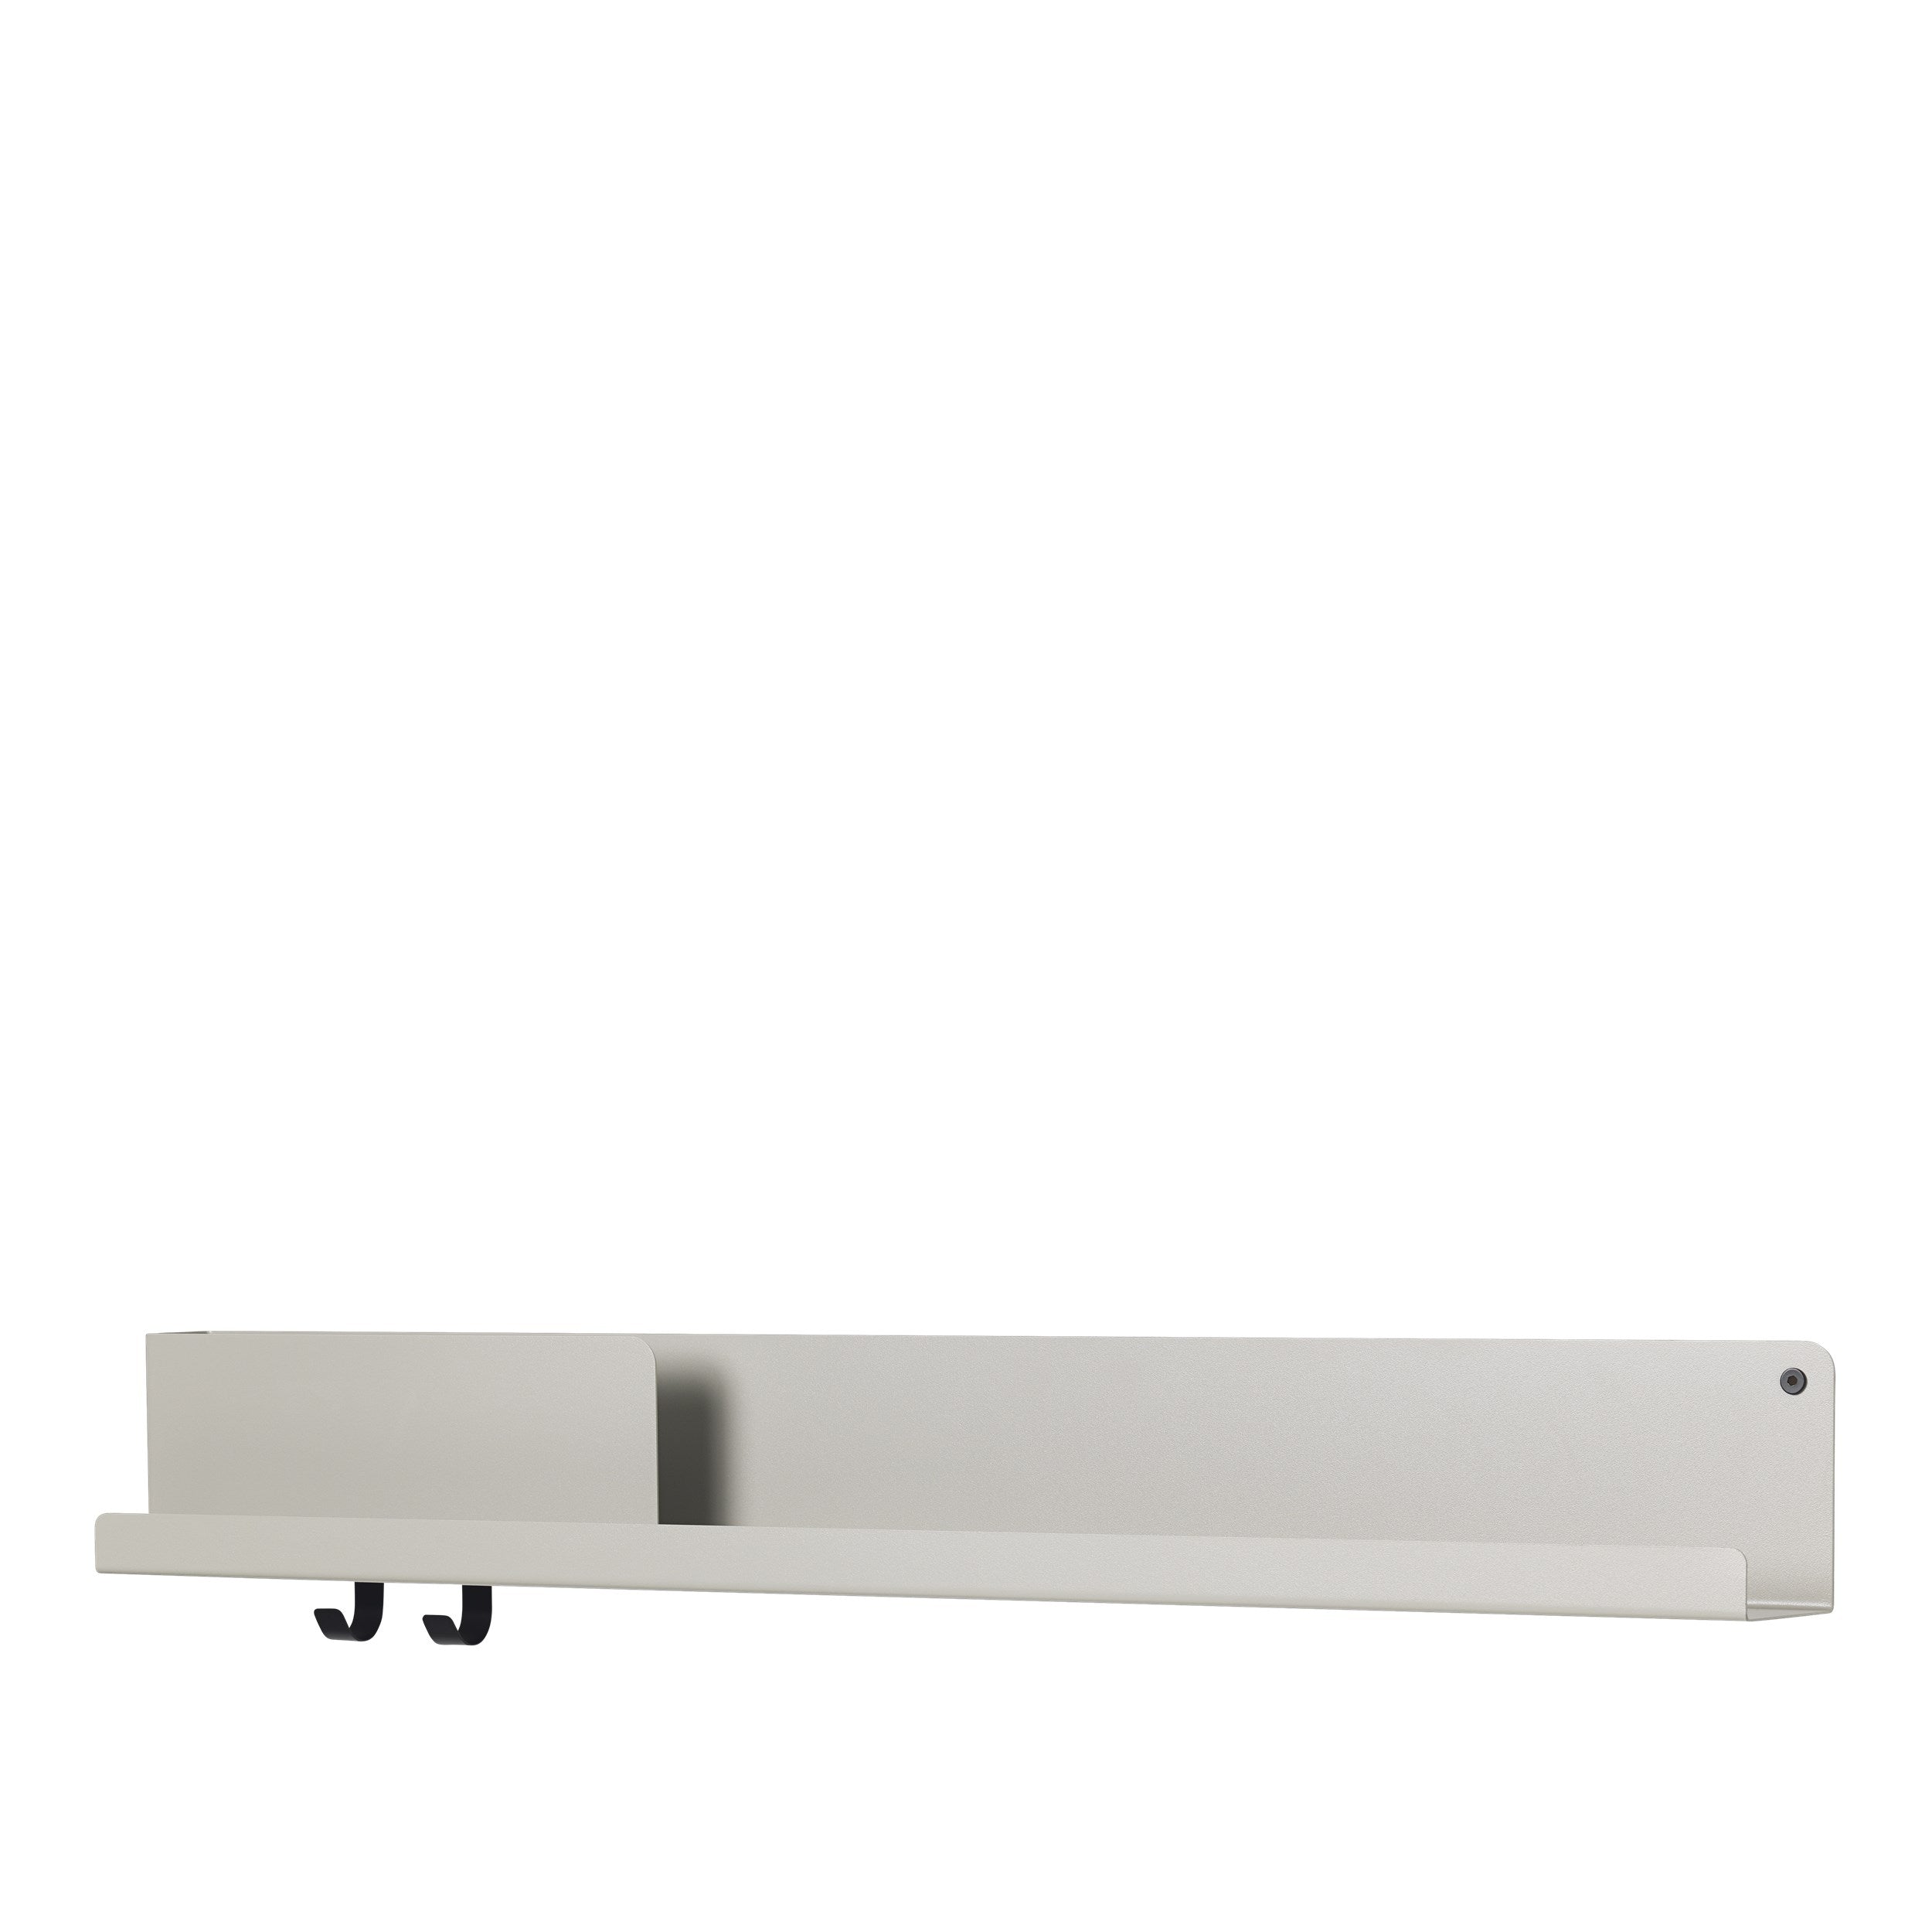 The Folded Shelves by Johan Van Hengel for Muuto imitates the look of folded paper yet shaped in metal, the Folded Shelves have a contemporary, functional character. The shelves come with two hooks and two bolts for mounting on the wall. The Folded Shelves are a modern and friendly way to add storage to any home or professional space.